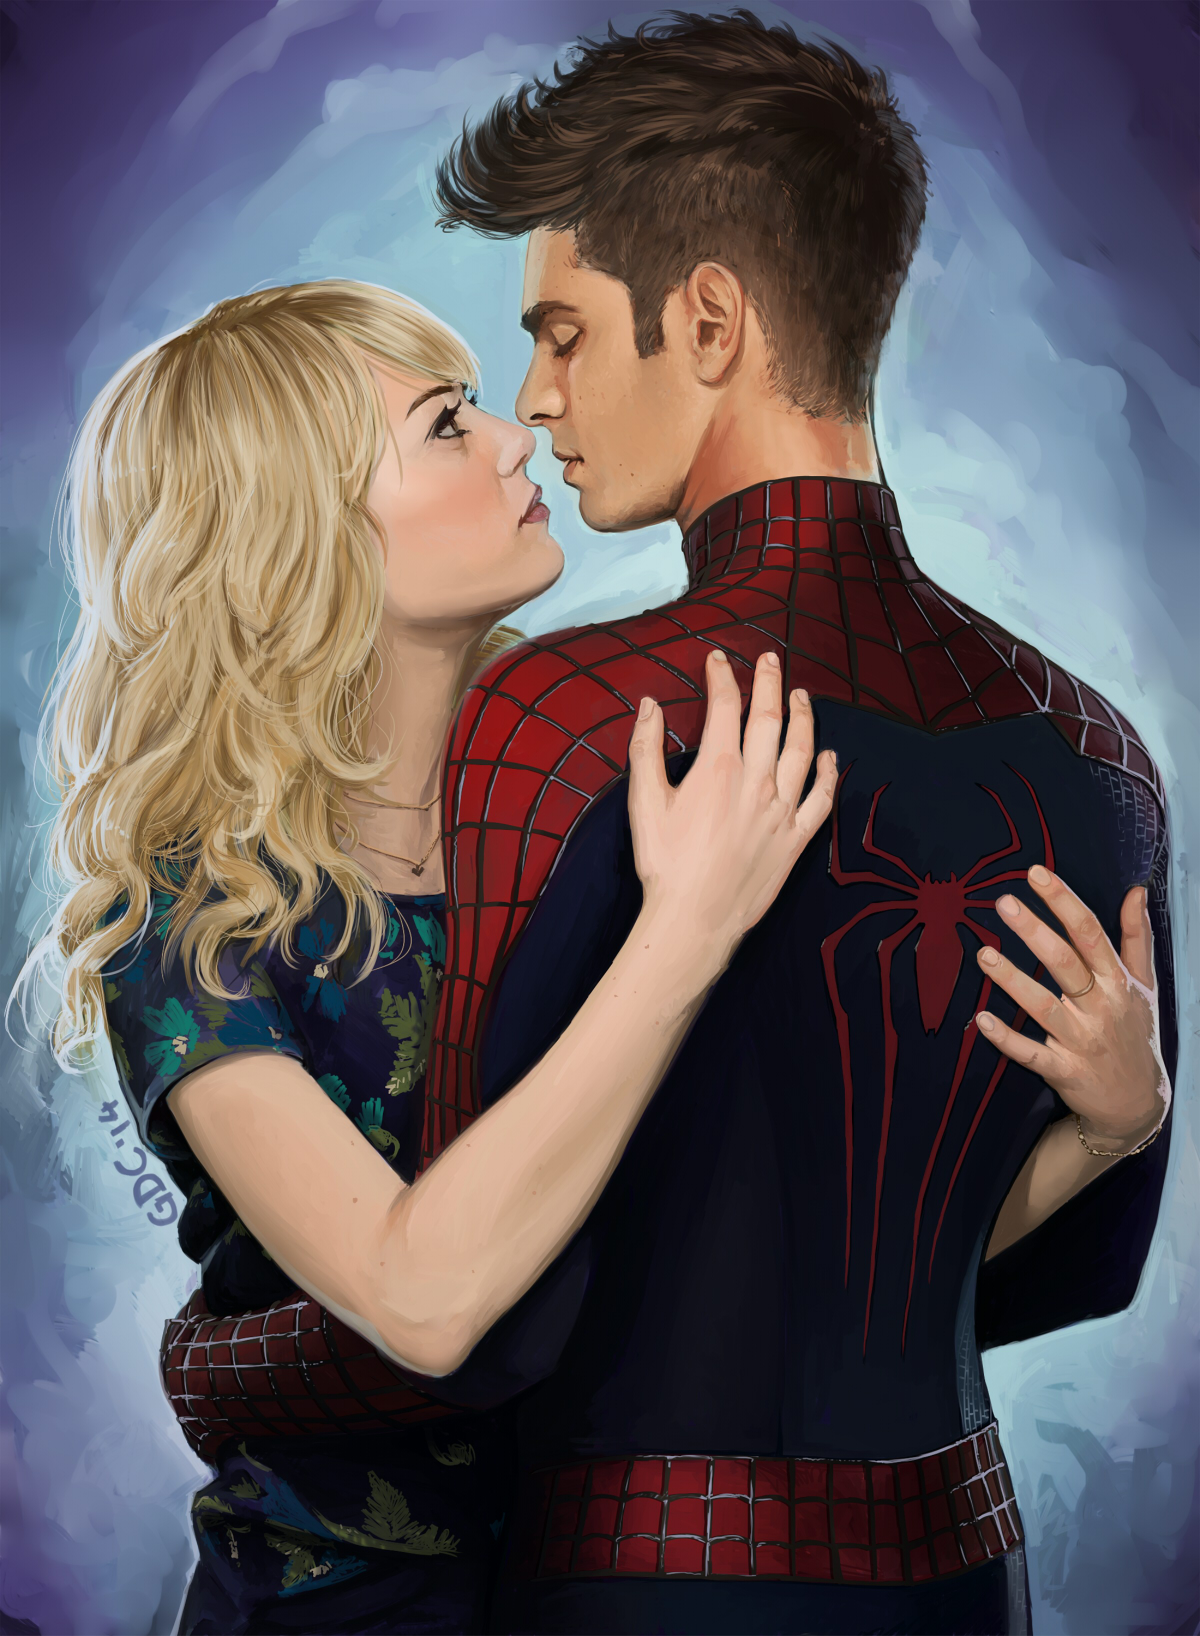 THE AMAZING SPIDERMAN 2 by alemarques21 on DeviantArt